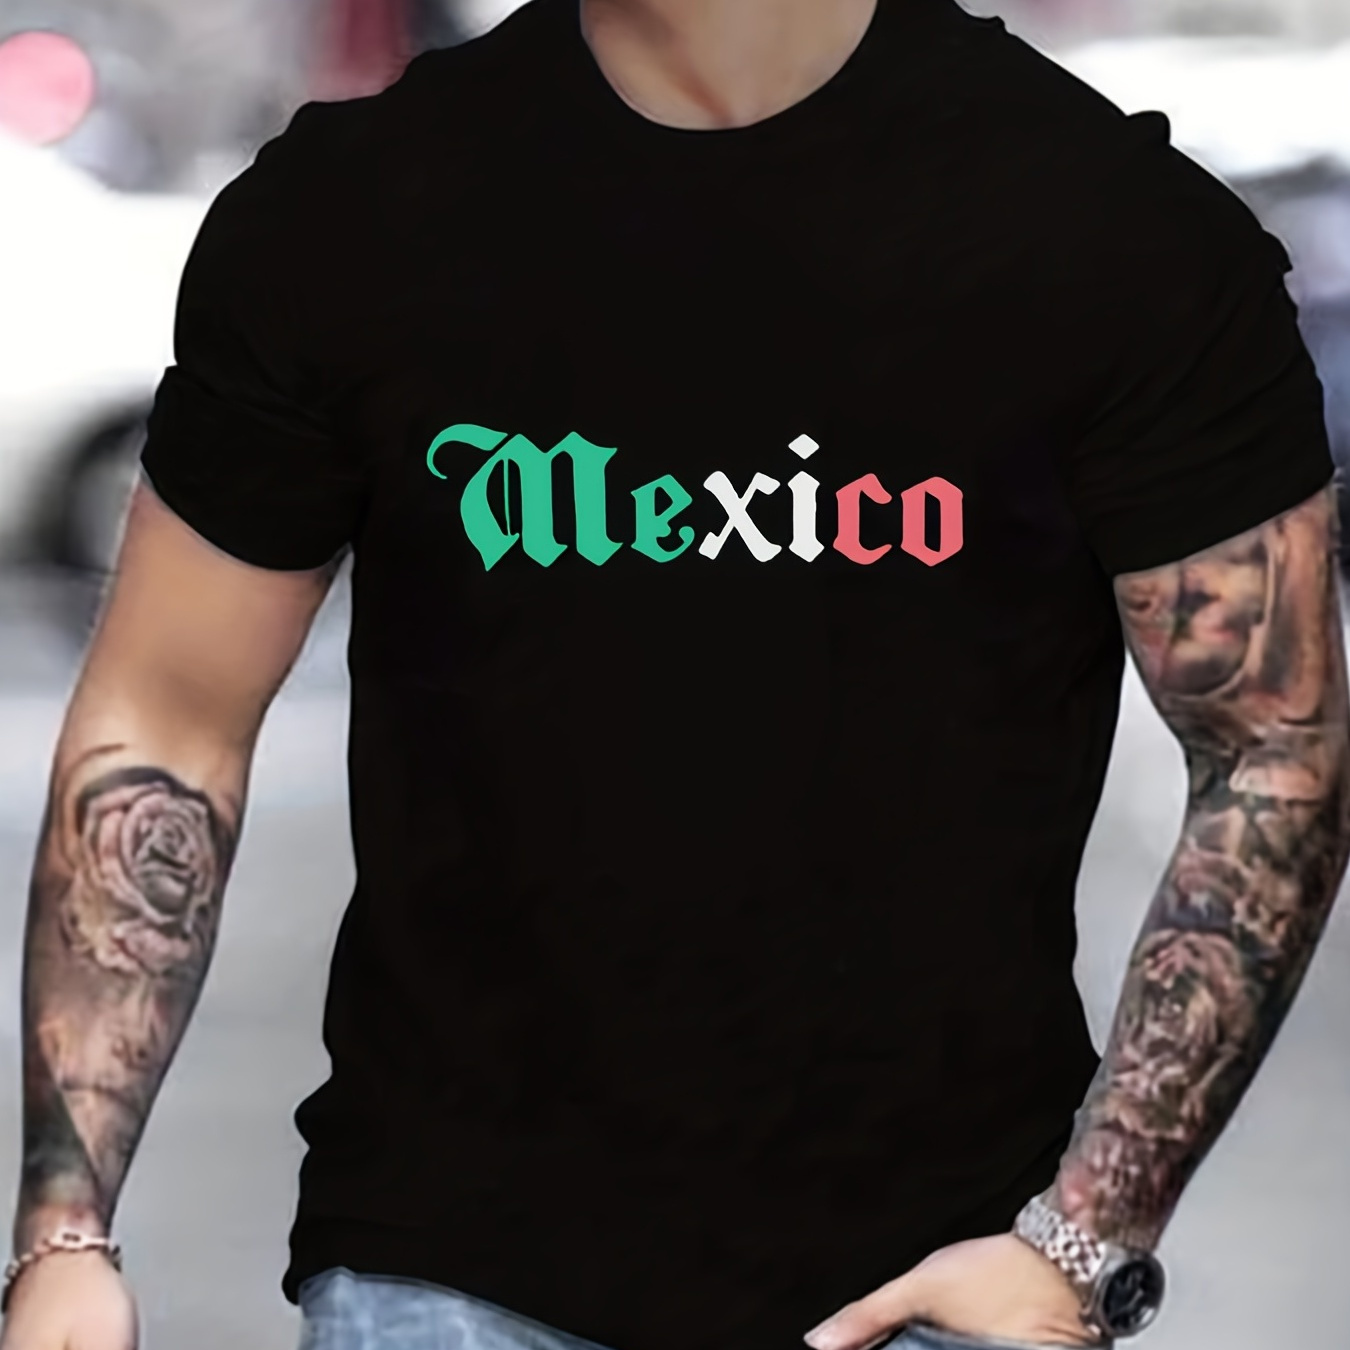 

Mexico Letter Graphic Print Men's Creative Top, Casual Short Sleeve Crew Neck T-shirt, Men's Tee For Summer Outdoor